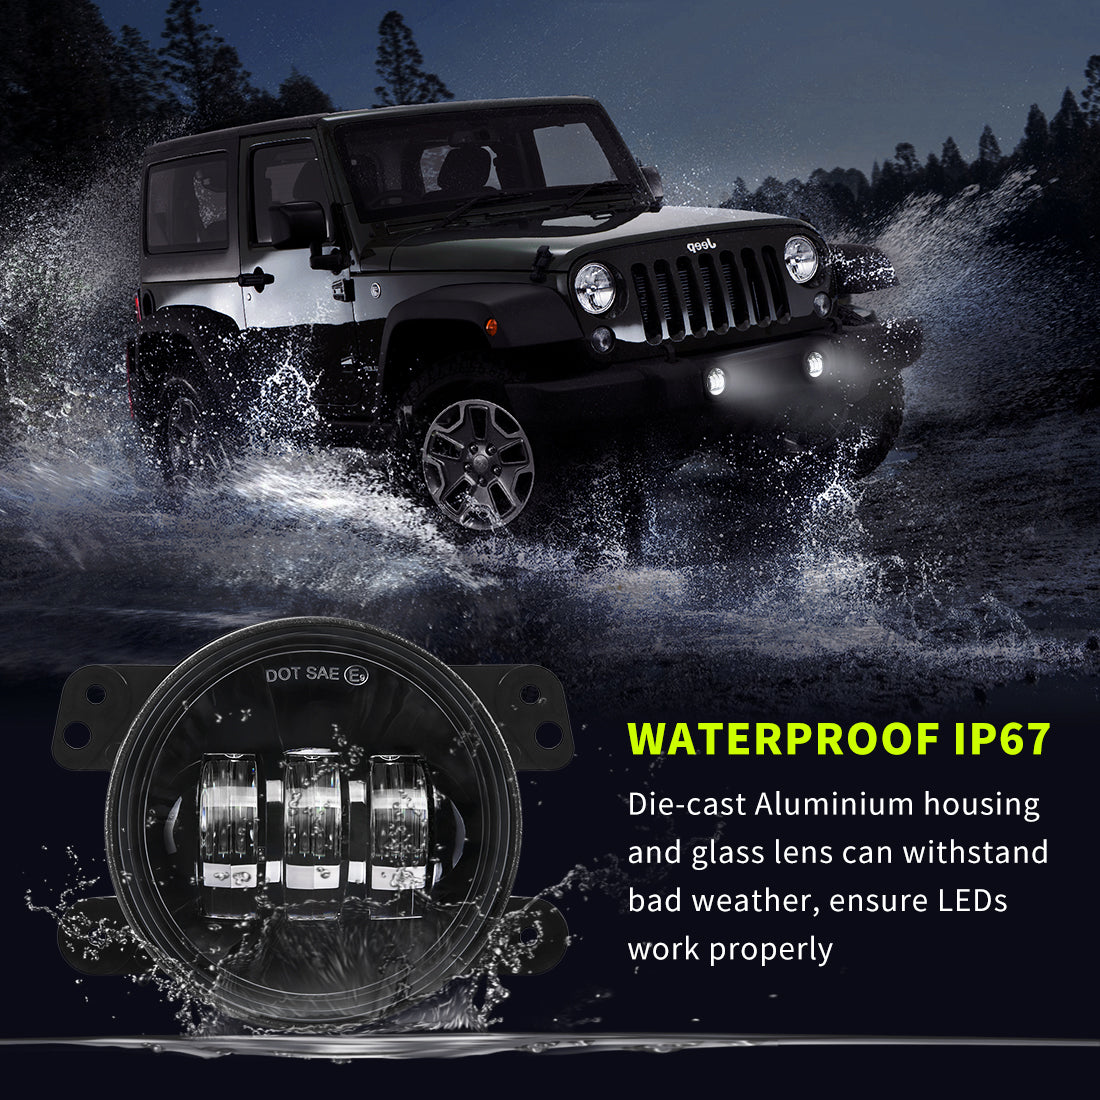 Crawlertec 4 inch 30W Cree Power Fog Lamps For Jeep Wrangler & Offroad